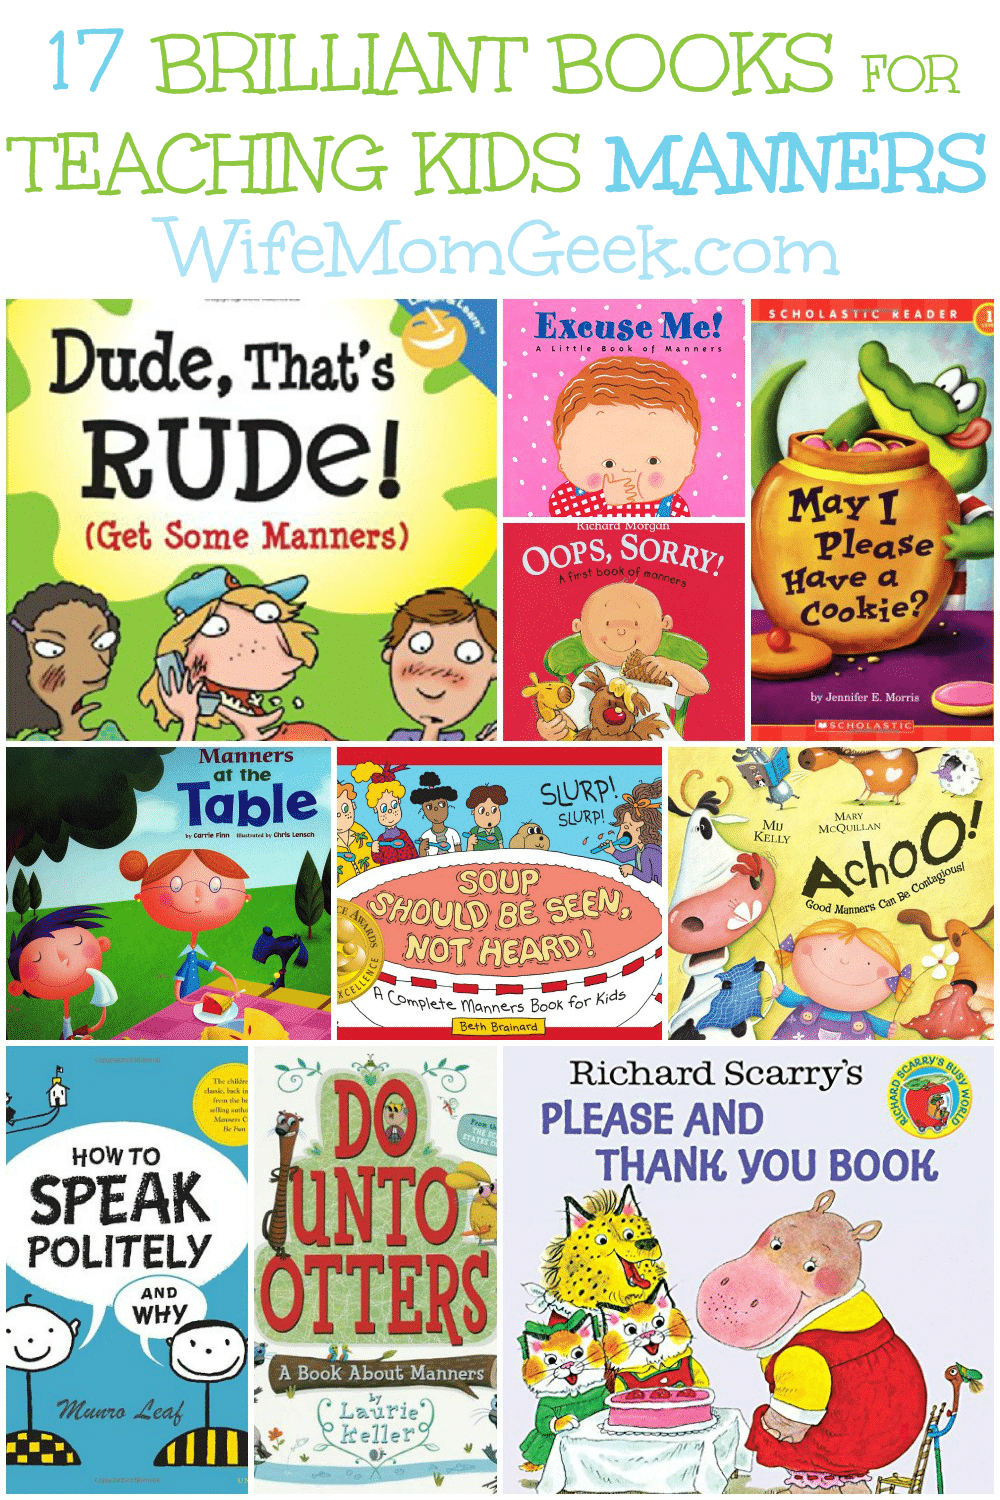 17 Brilliant Books for Teaching Kids Manners